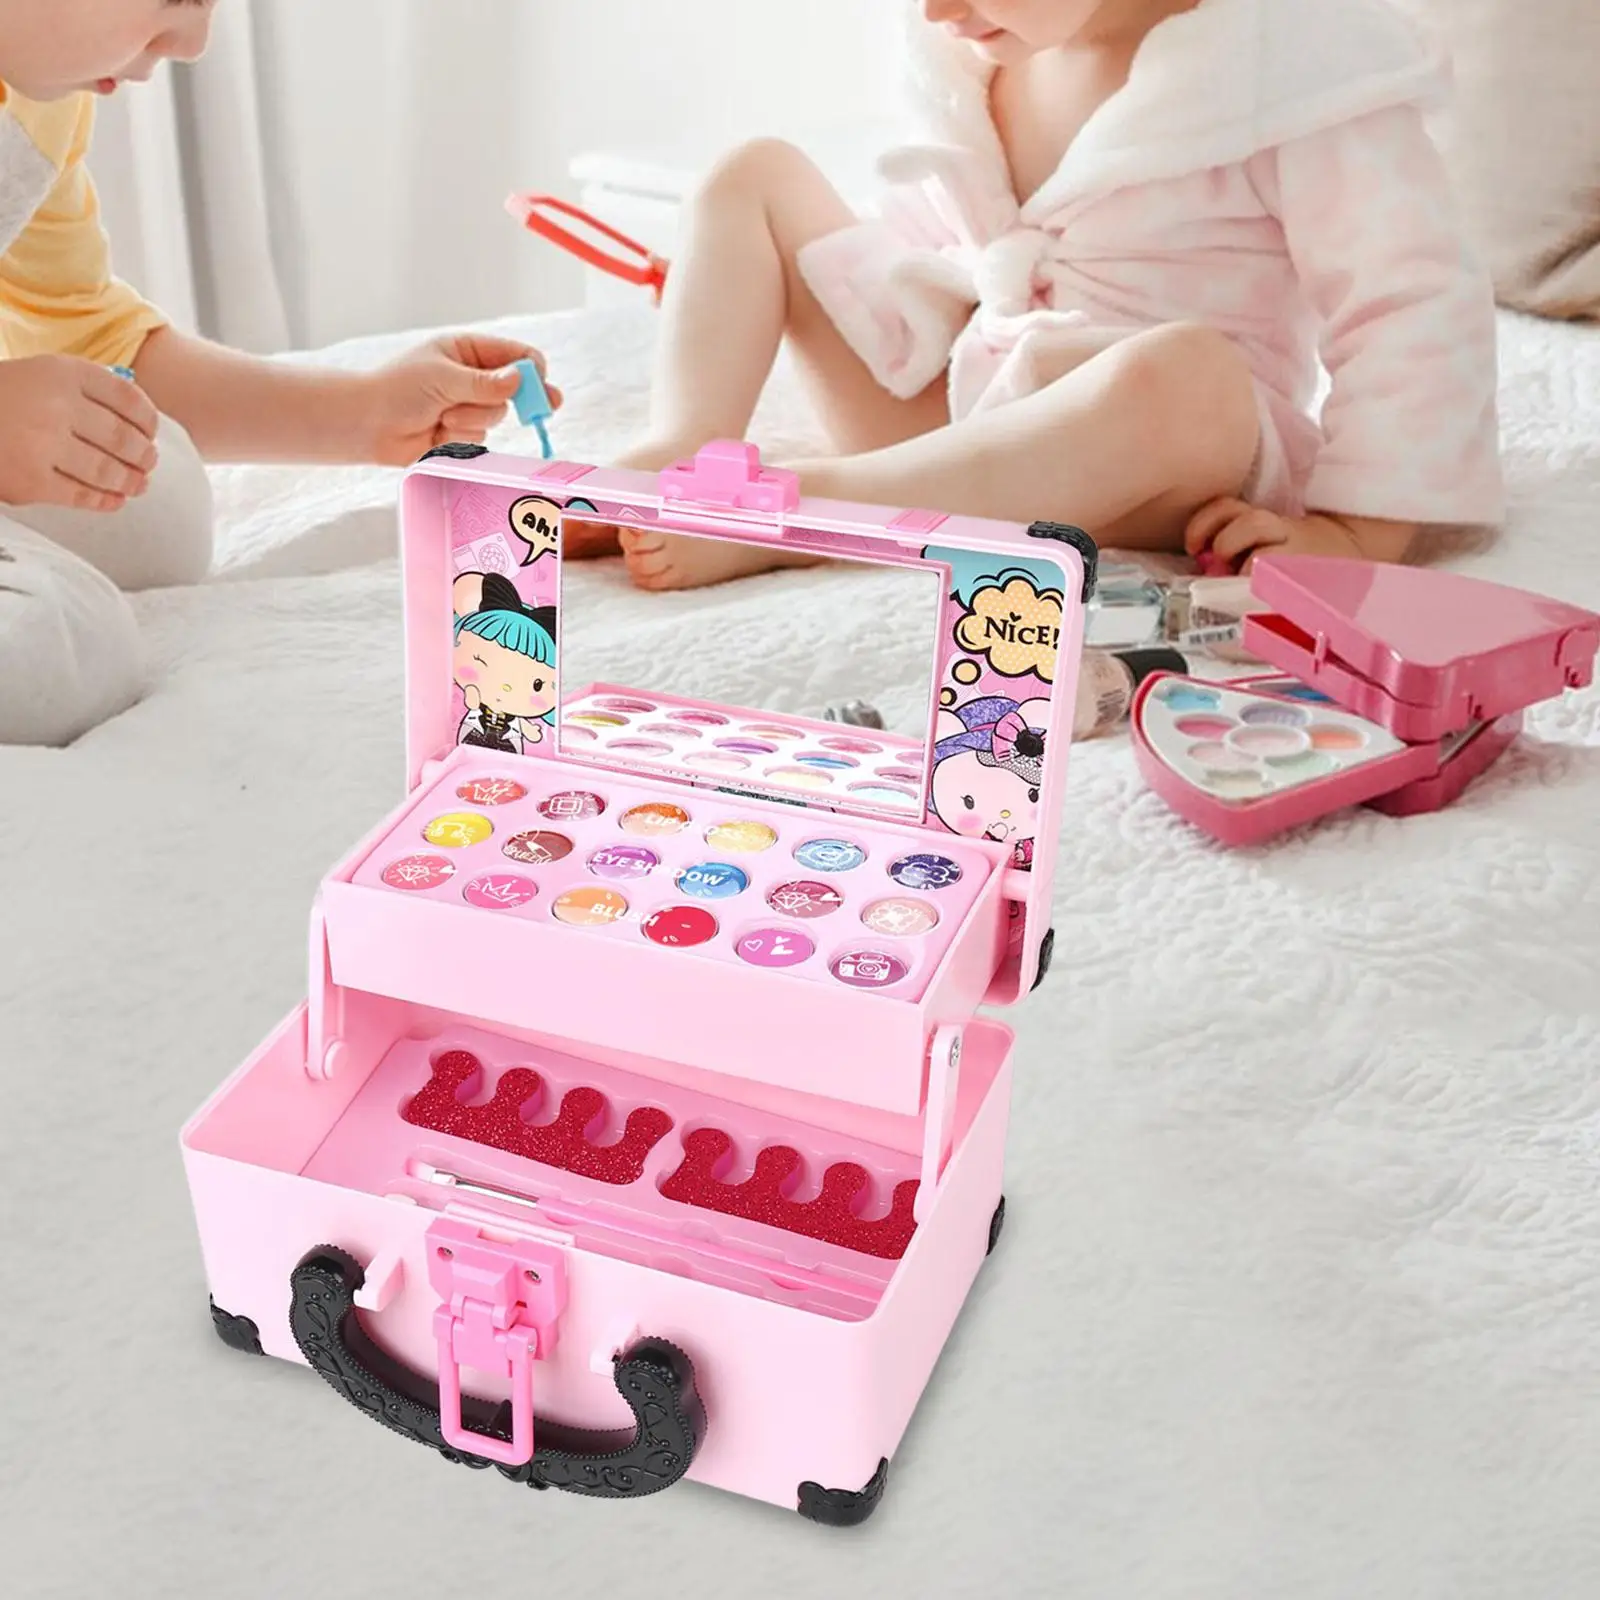 Pretend Play Makeup Toy Set Portable Makeup Vanity Toy Cosmetics Makeup Toy Set for Girls Kids Toddlers Children Birthday Gifts